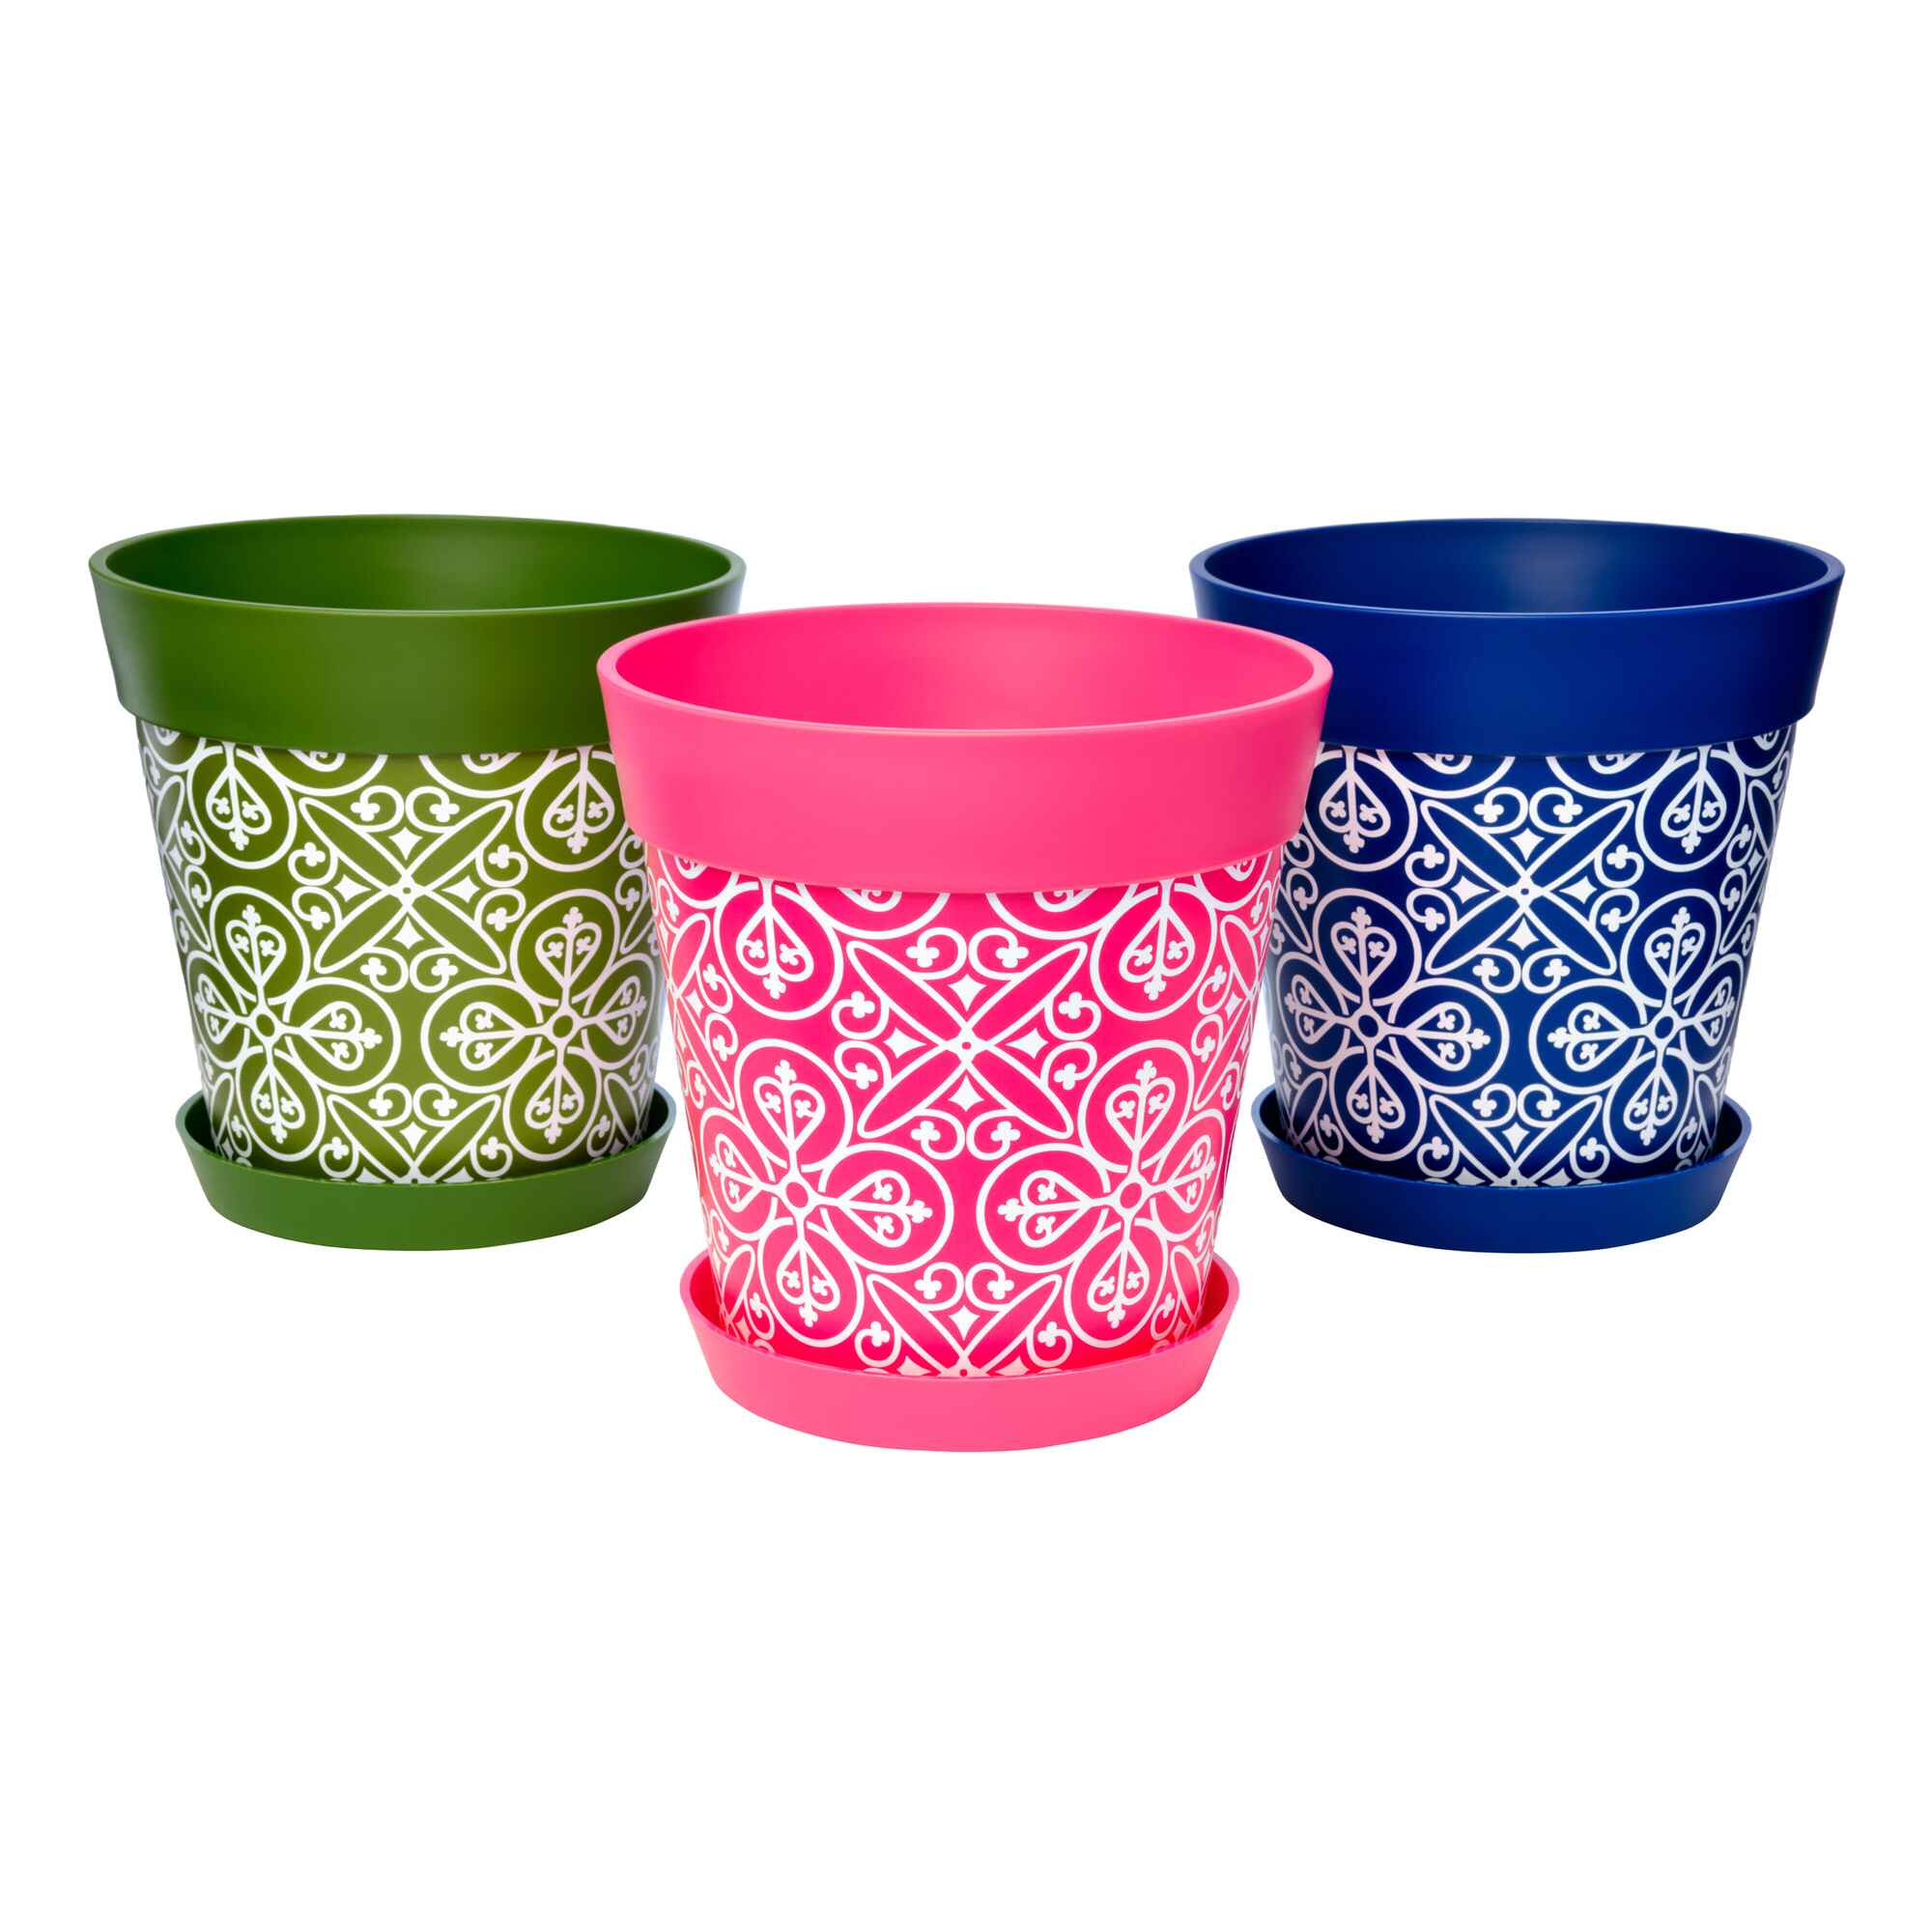 Picture of 3 Medium 22cm Plastic Multi Colour Moroccan Style Indoor/Outdoor Flowerpots with Saucers 